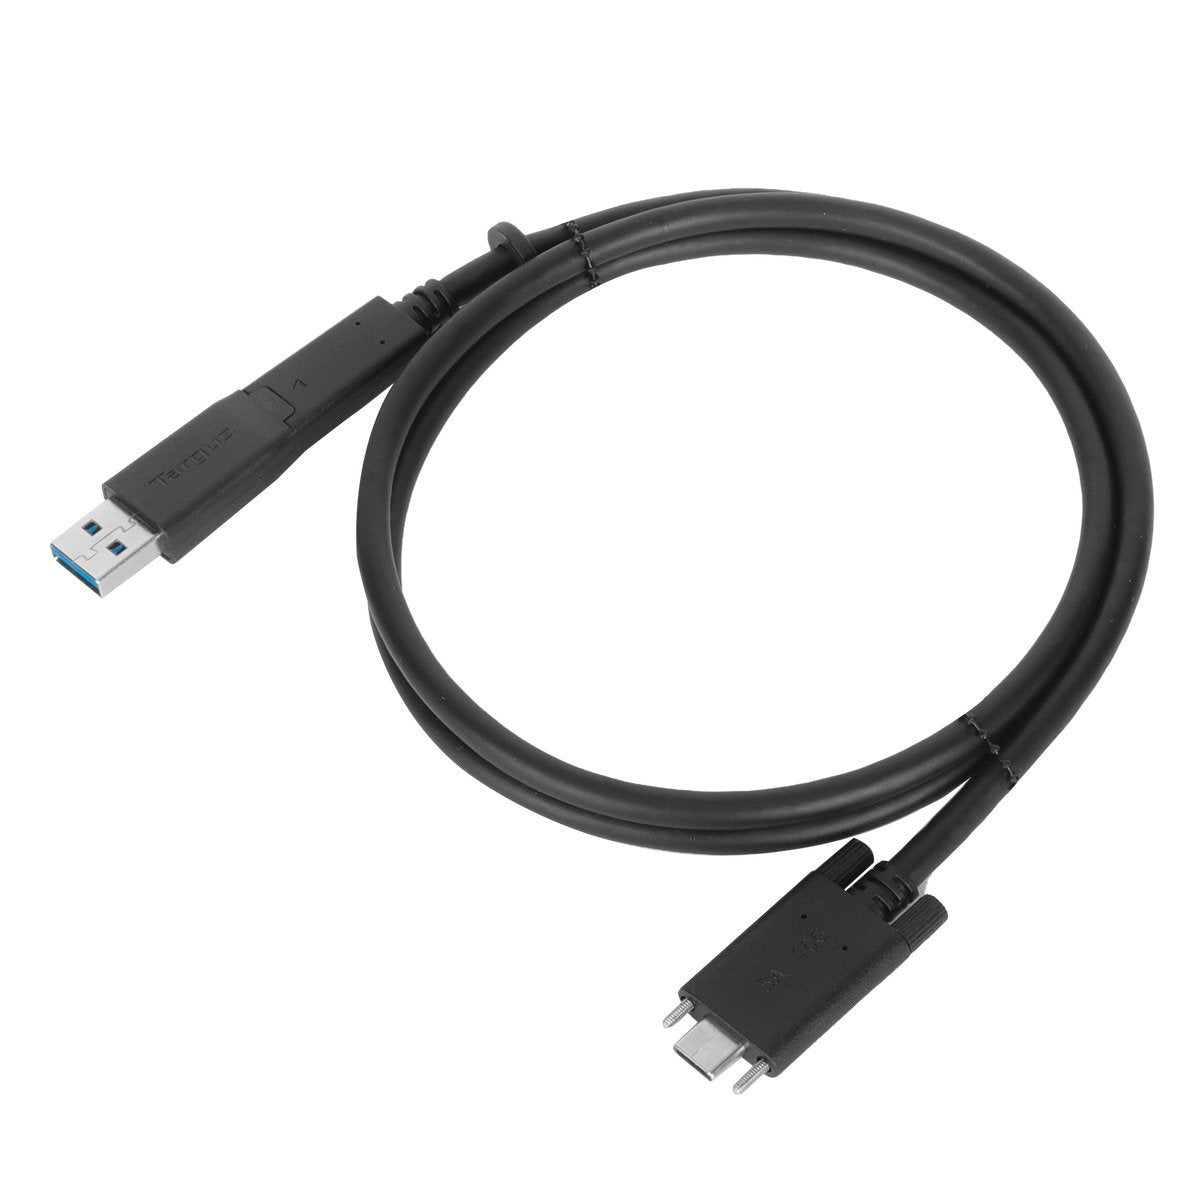 1-Meter USB-C to USB-B 15bps Cable - ACC924USX: Cables & Adapters: Targus